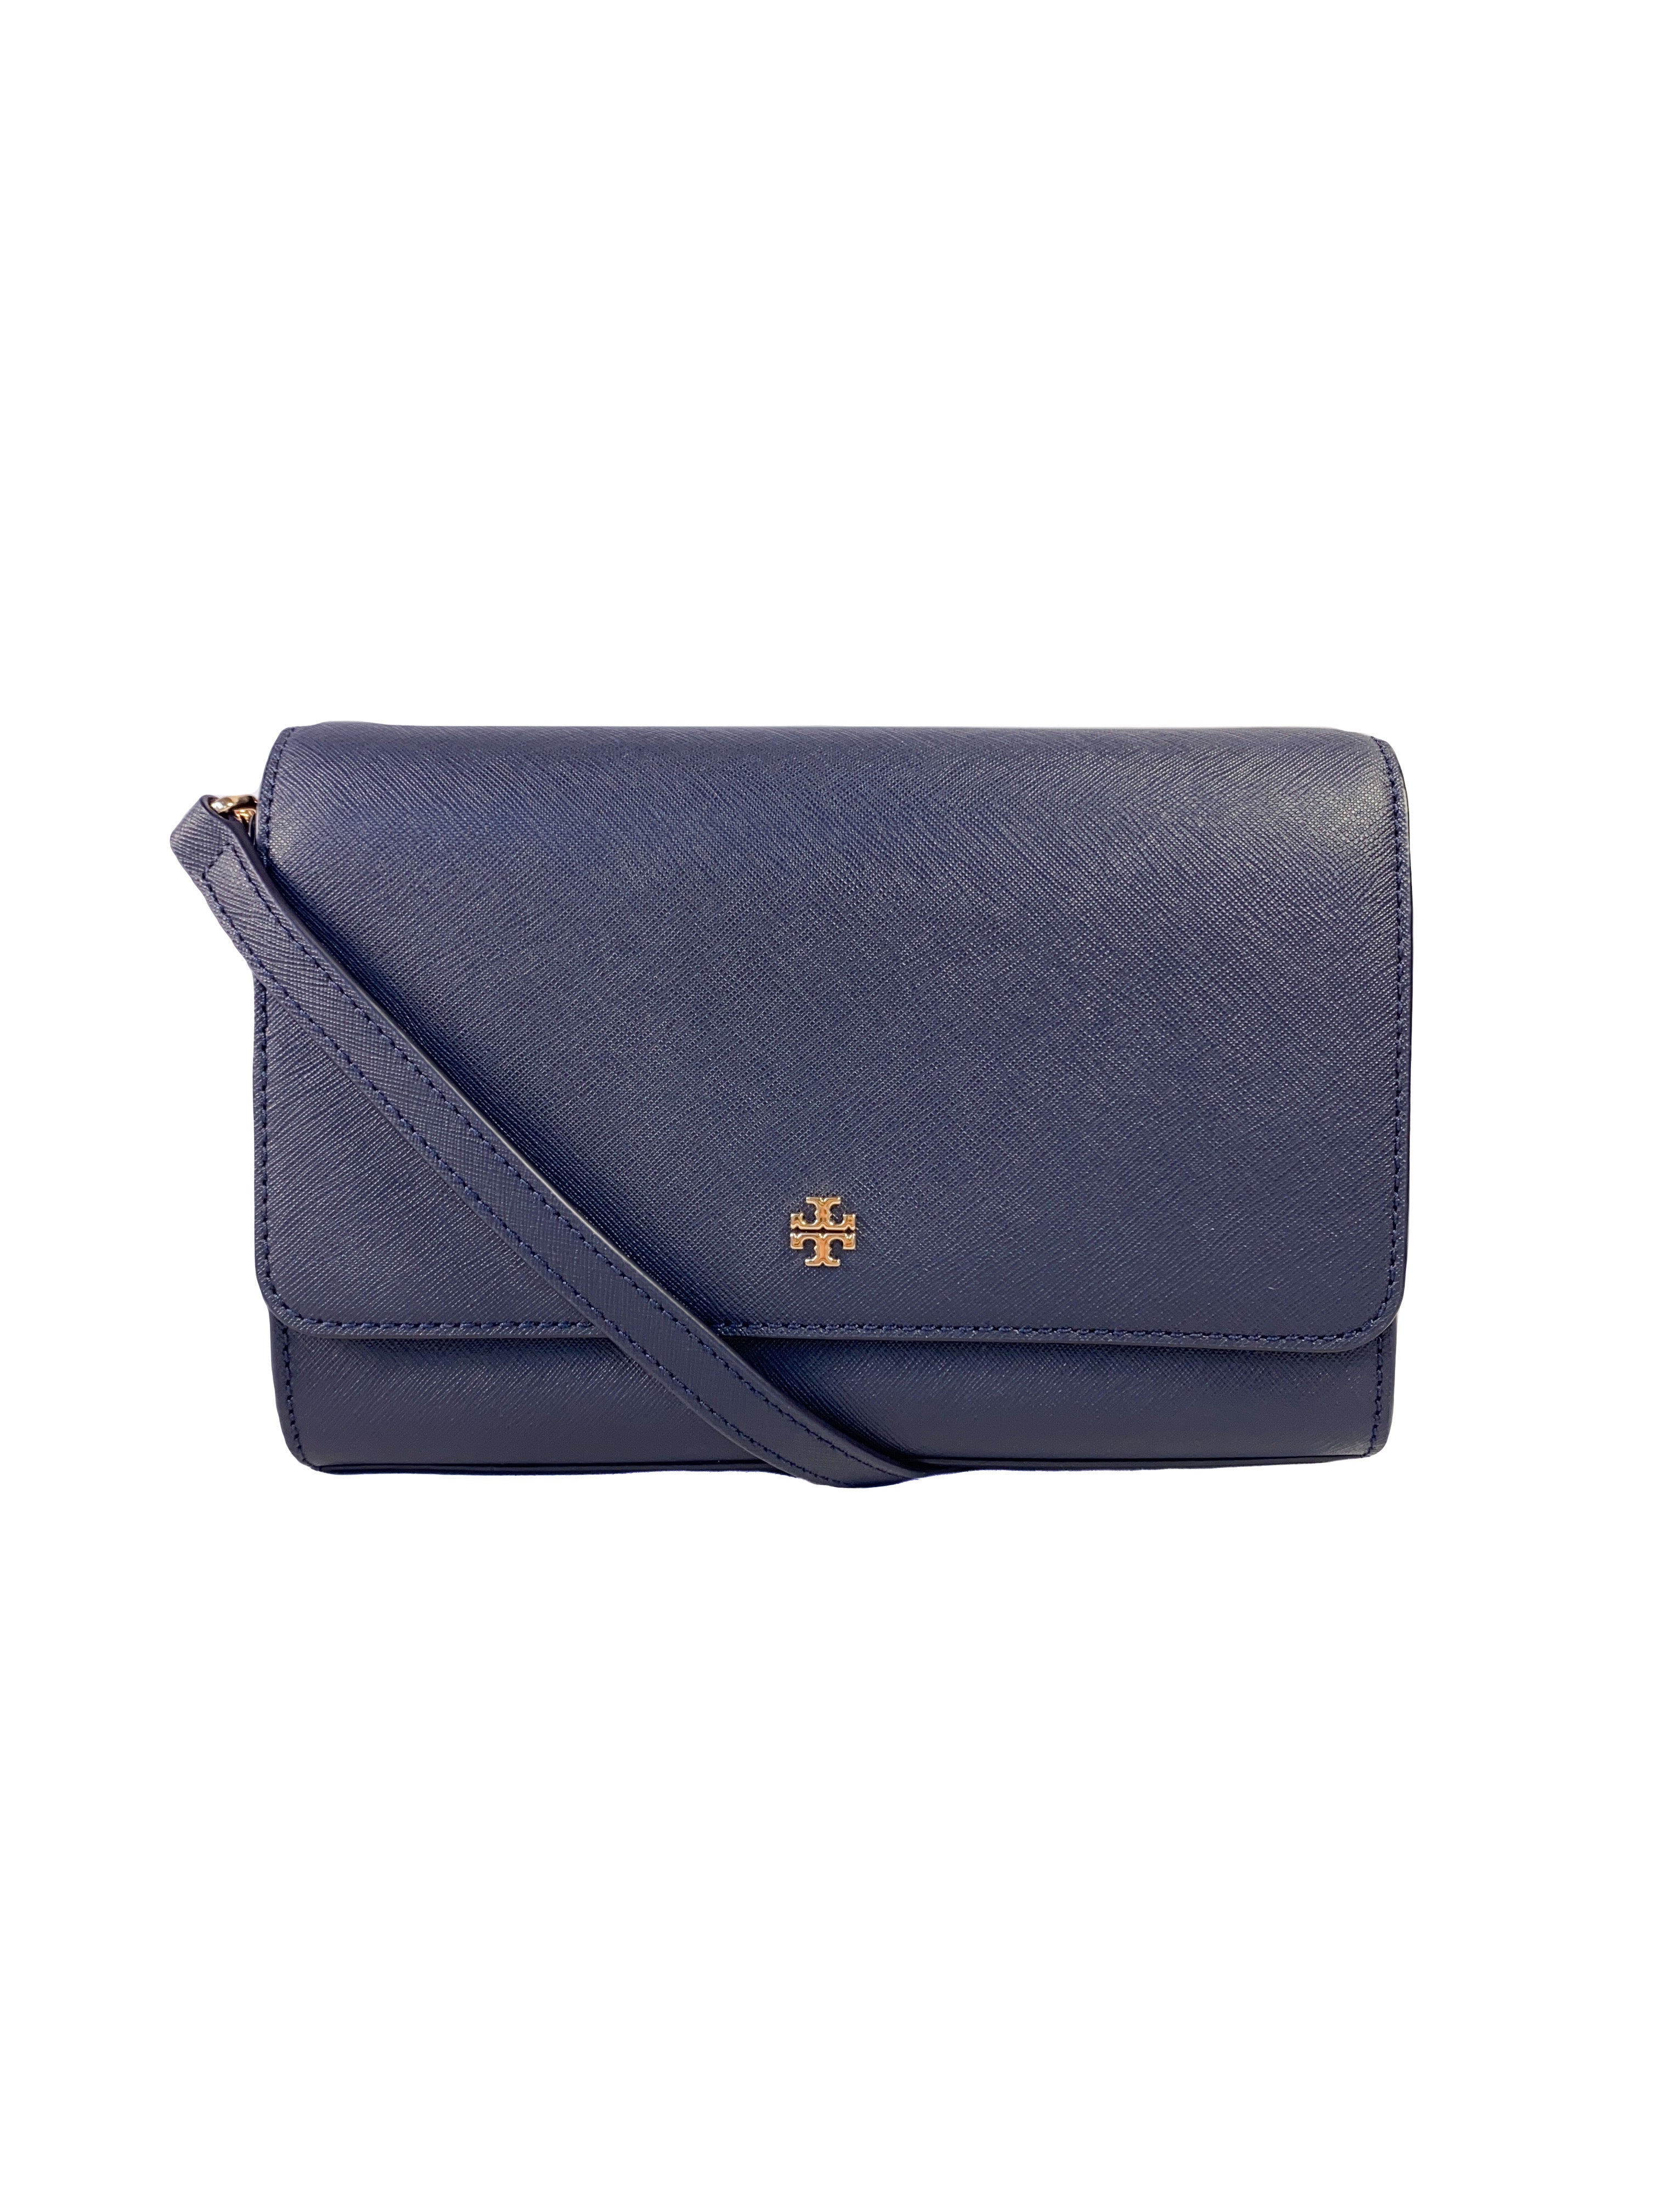 TORY BURCH Emerson Combo Crossbody Color Navy Style #78603